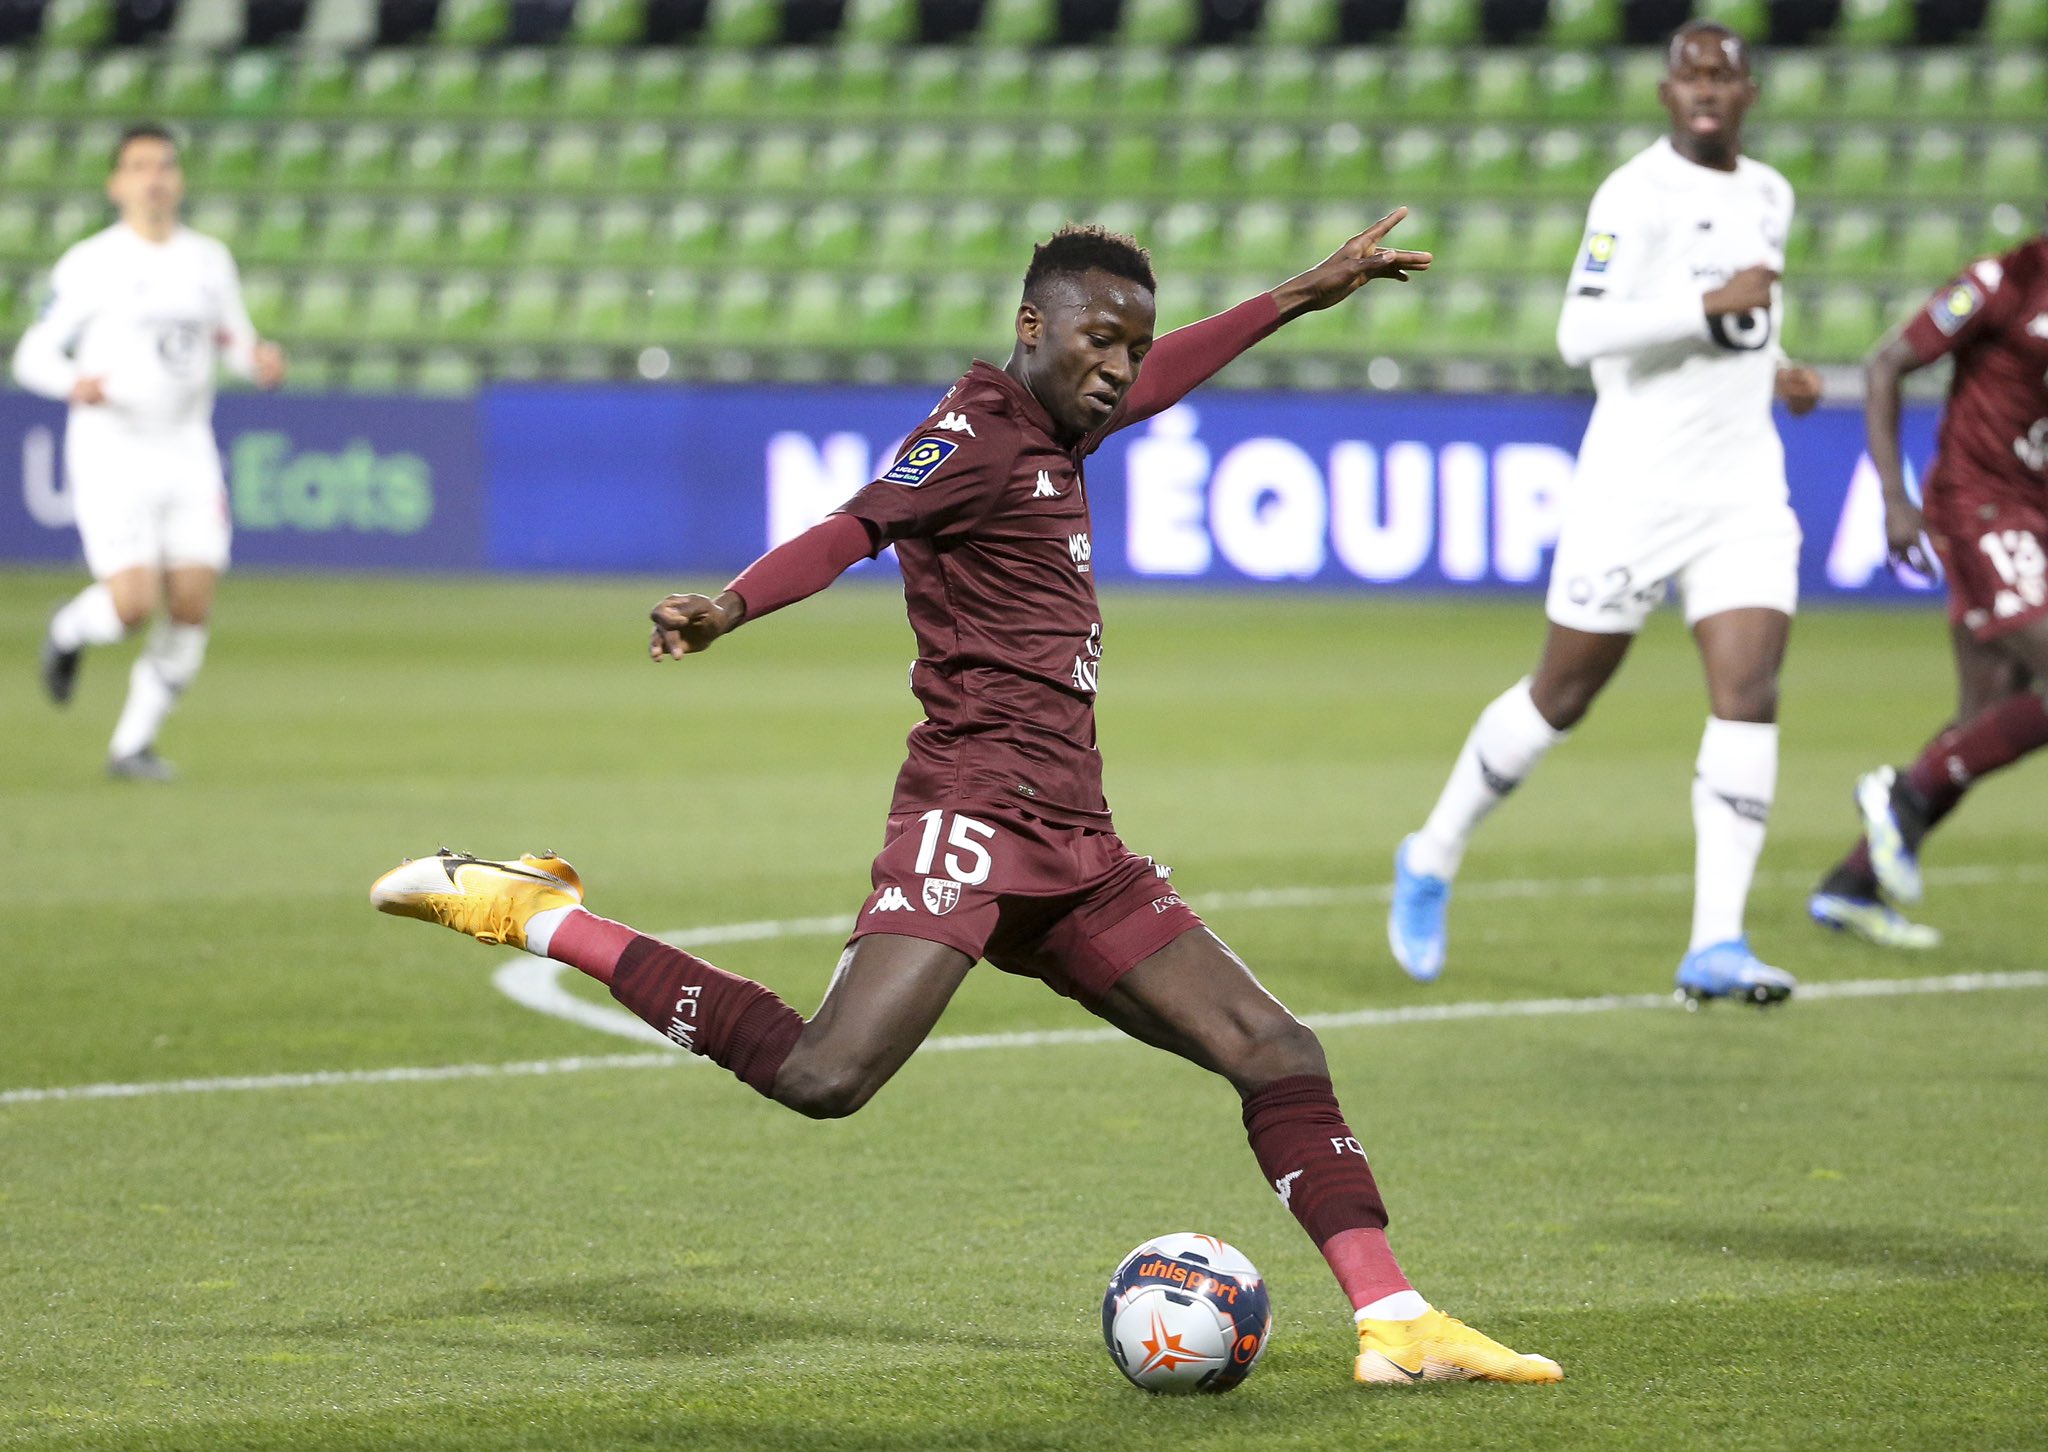 Reports | Tottenham set to sign Metz’s Pape Sarr ahead of Manchester City for €10 million fee